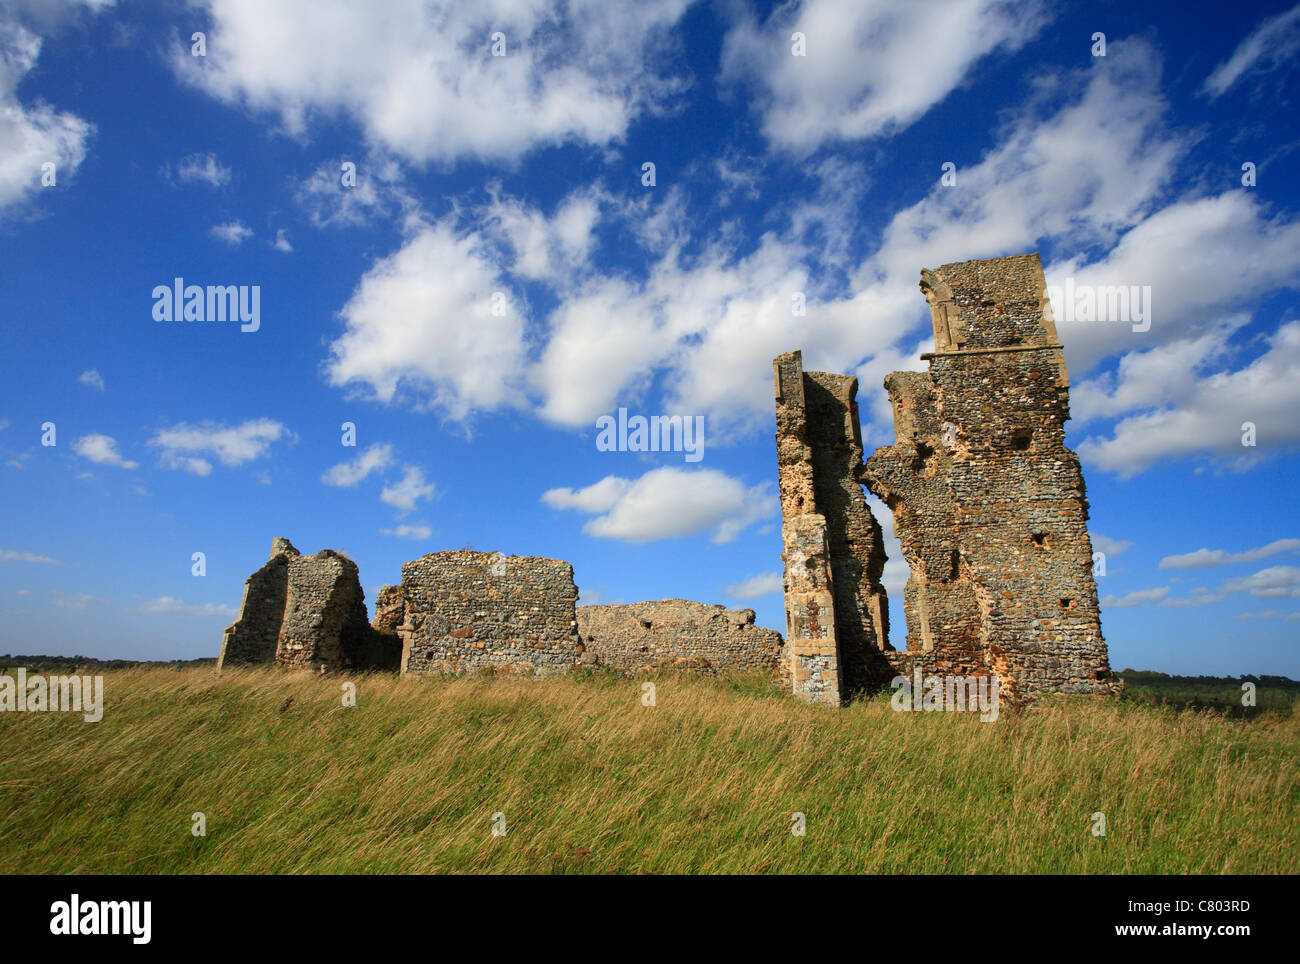 The ruins of St. James' church at Bawsey, King's Lynn in Norfolk. Stock Photo